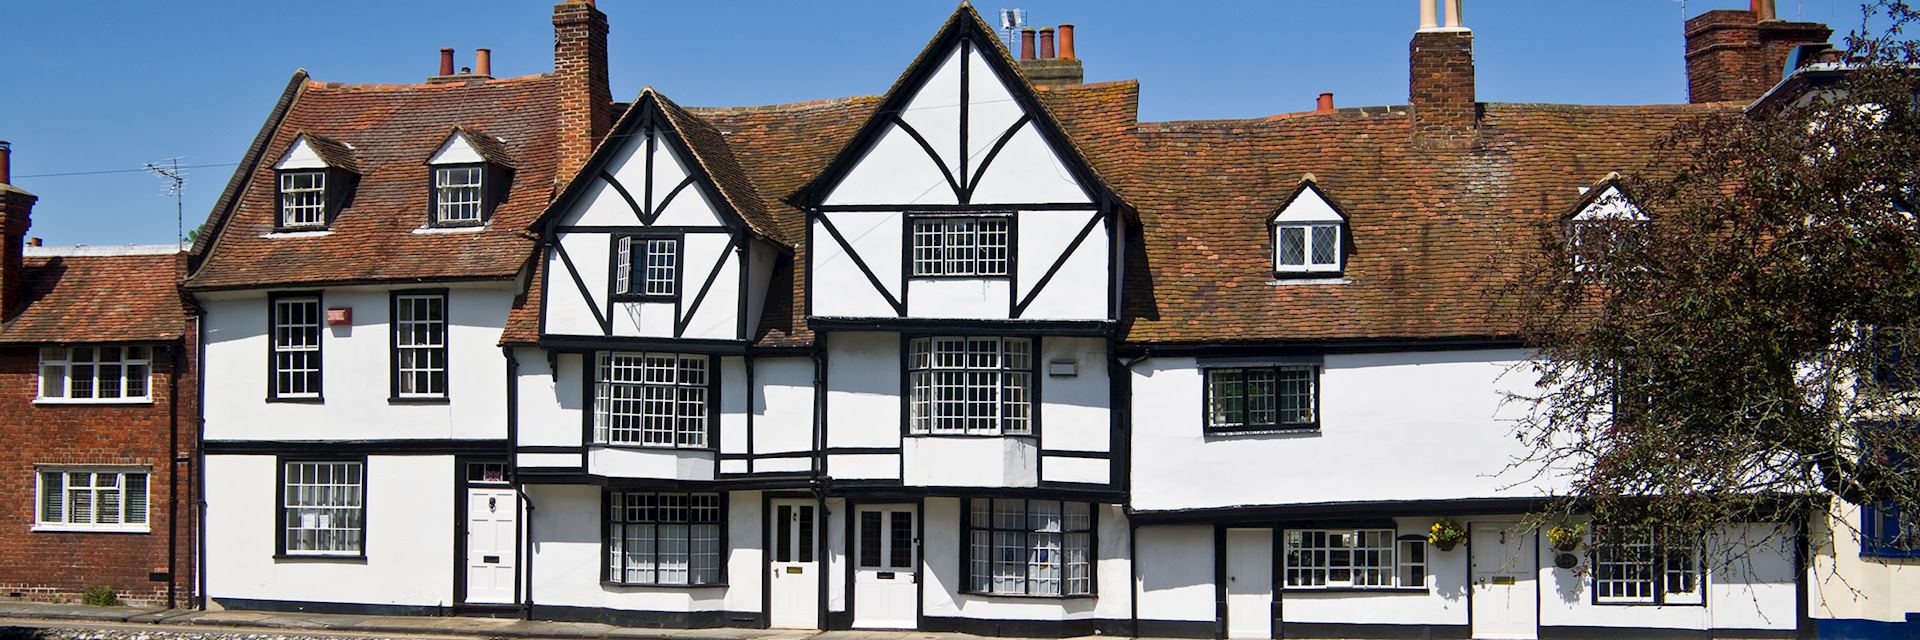 Medieval houses in Canterbury